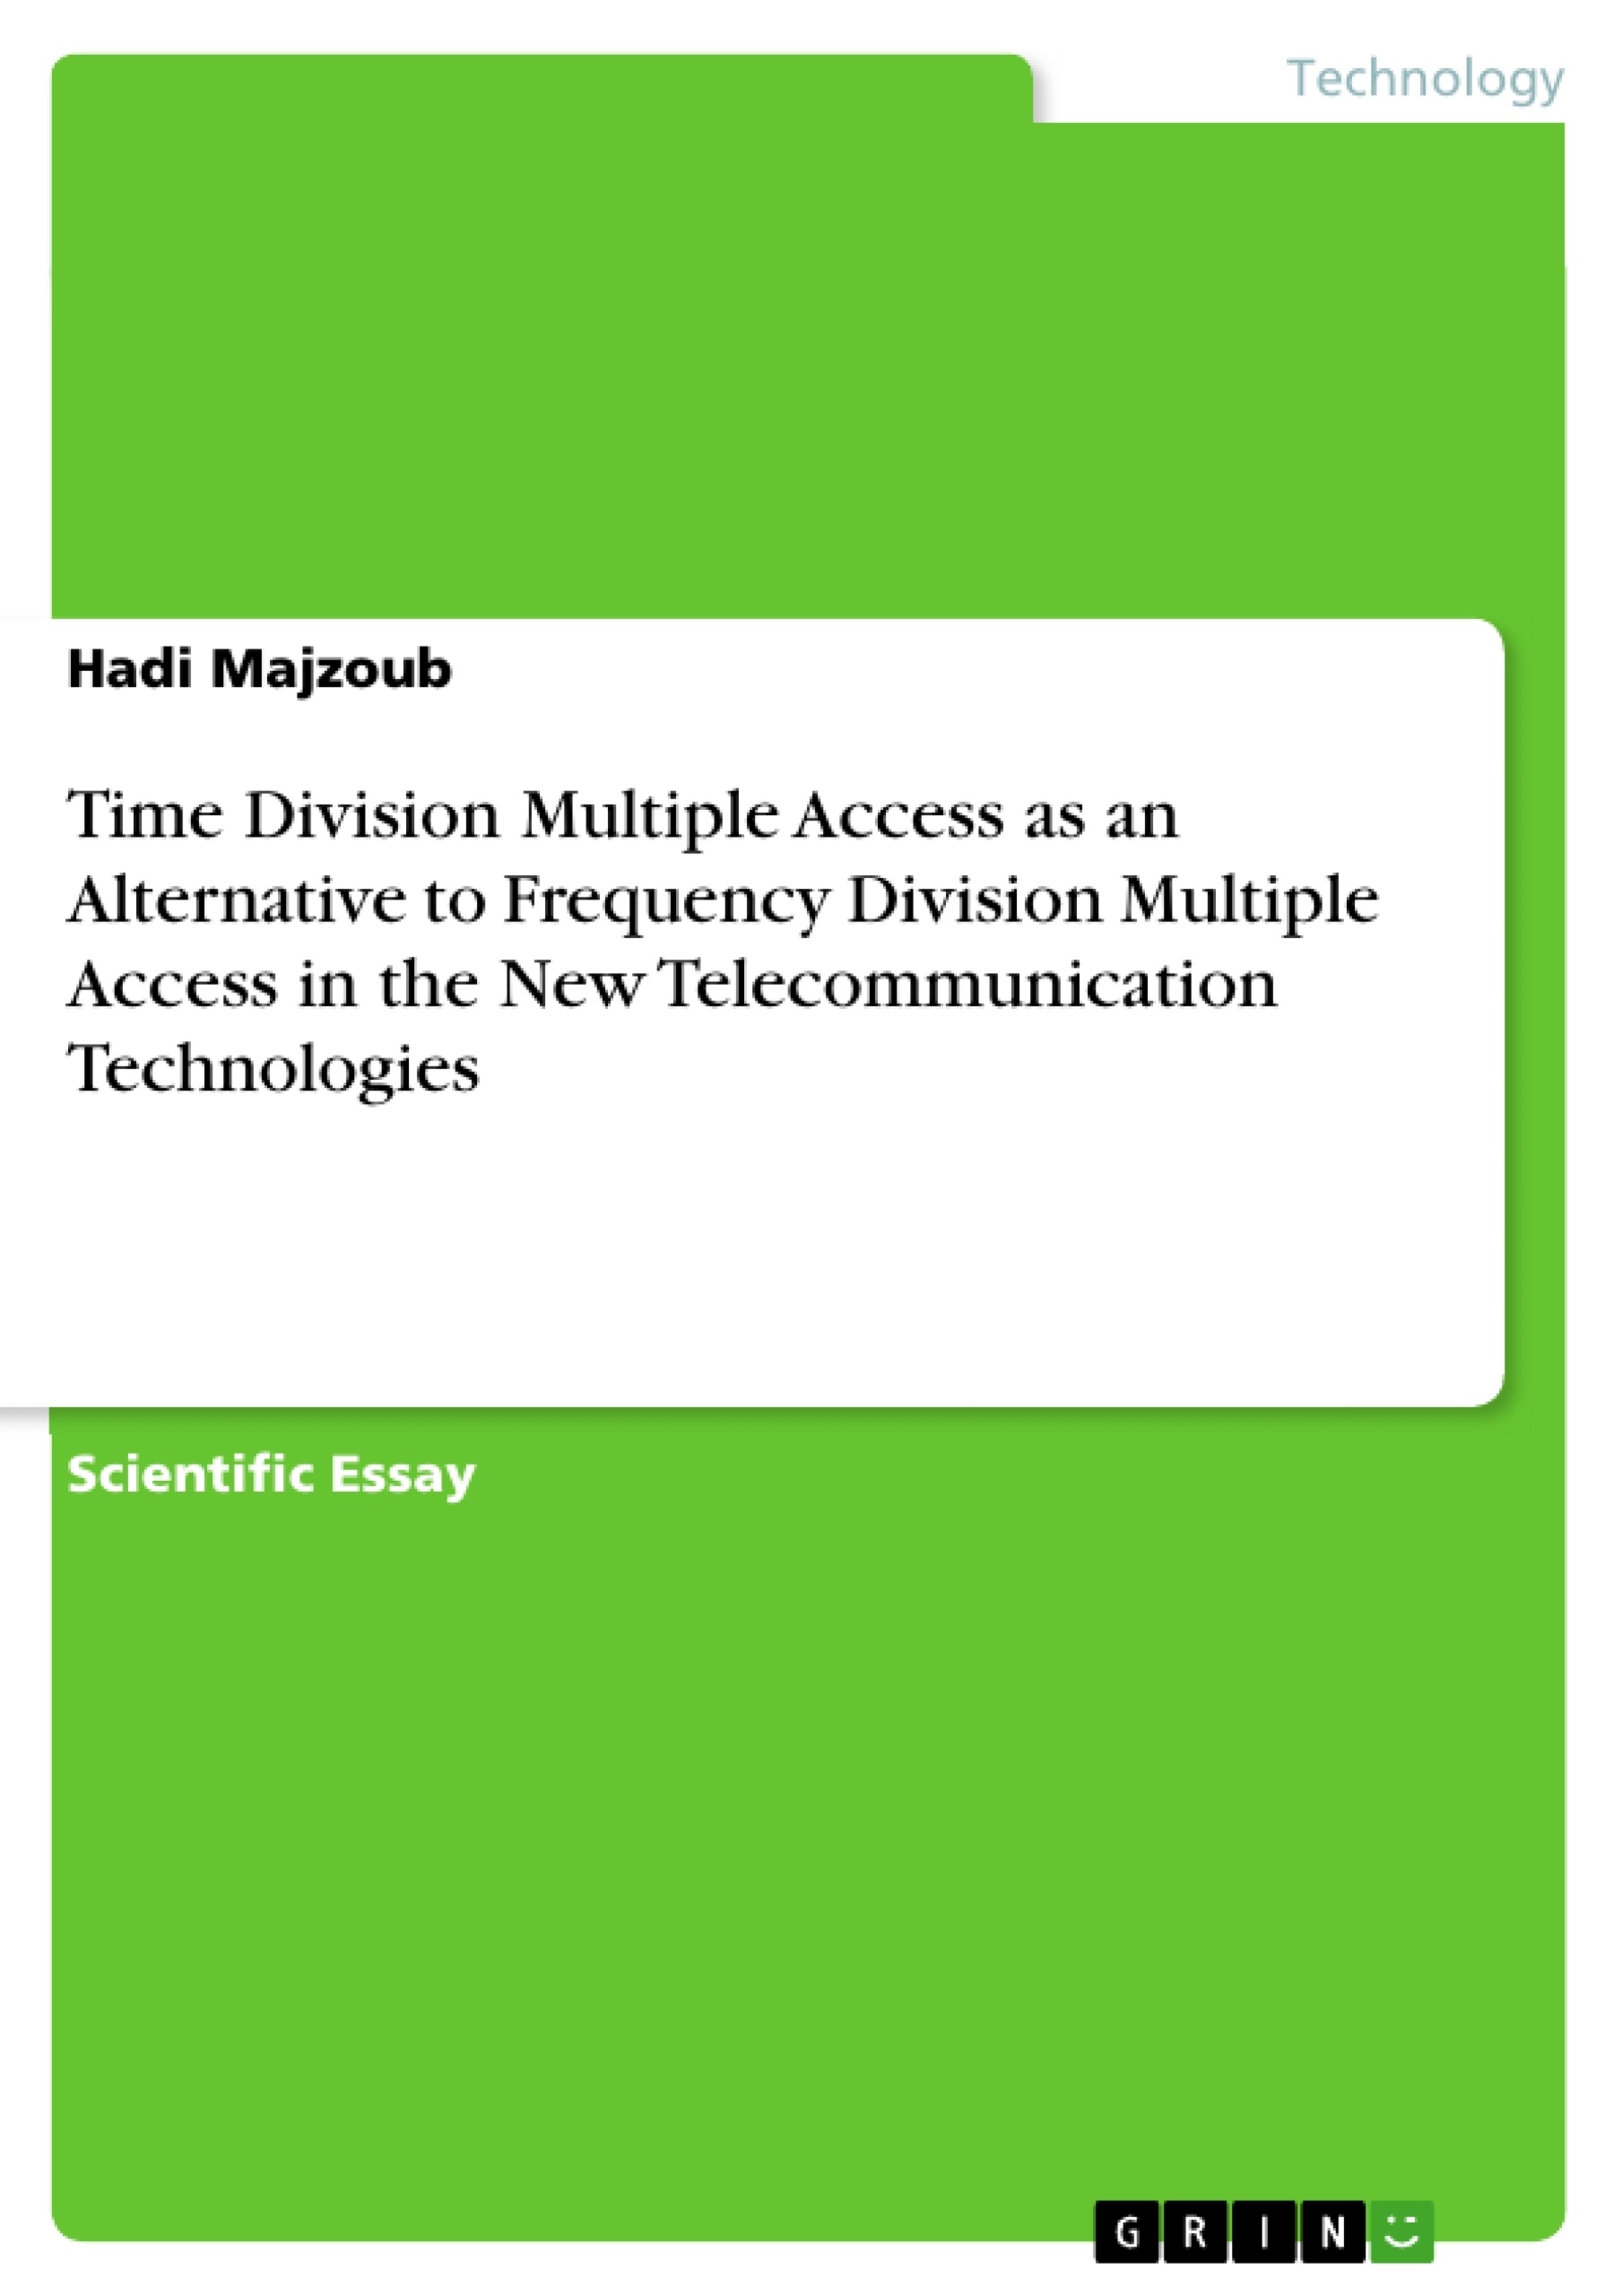 Title: Time Division Multiple Access as an Alternative to Frequency Division Multiple Access in the New Telecommunication Technologies